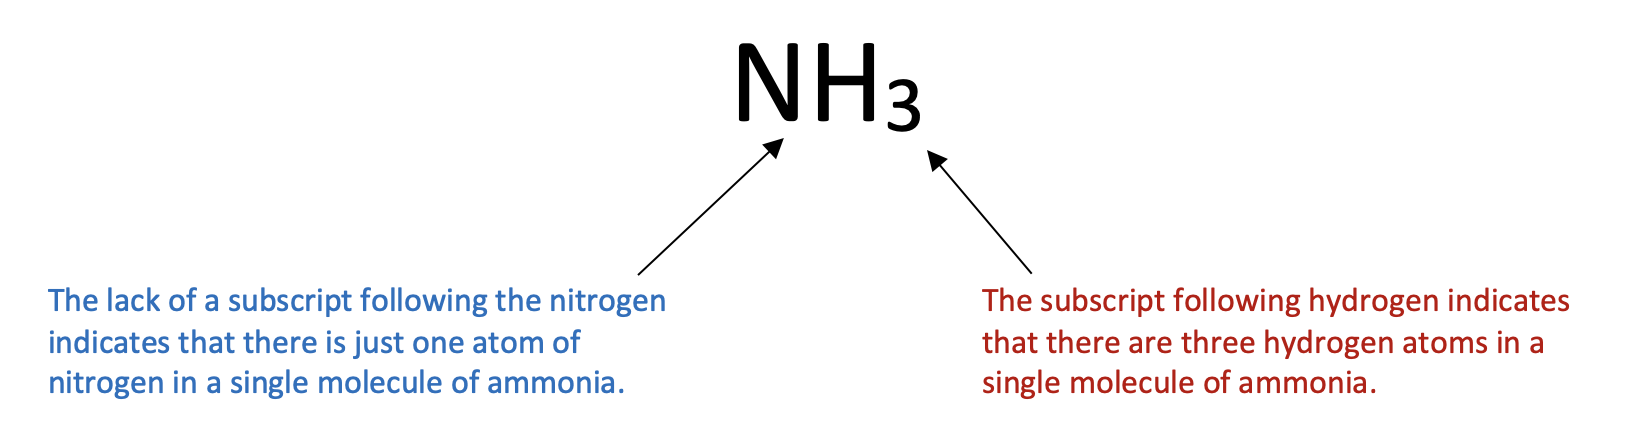 Molecular formula for ammonia: NH3. There is one atom of nitrogen and 3 atoms of hydrogen in a molecule of ammonia. 